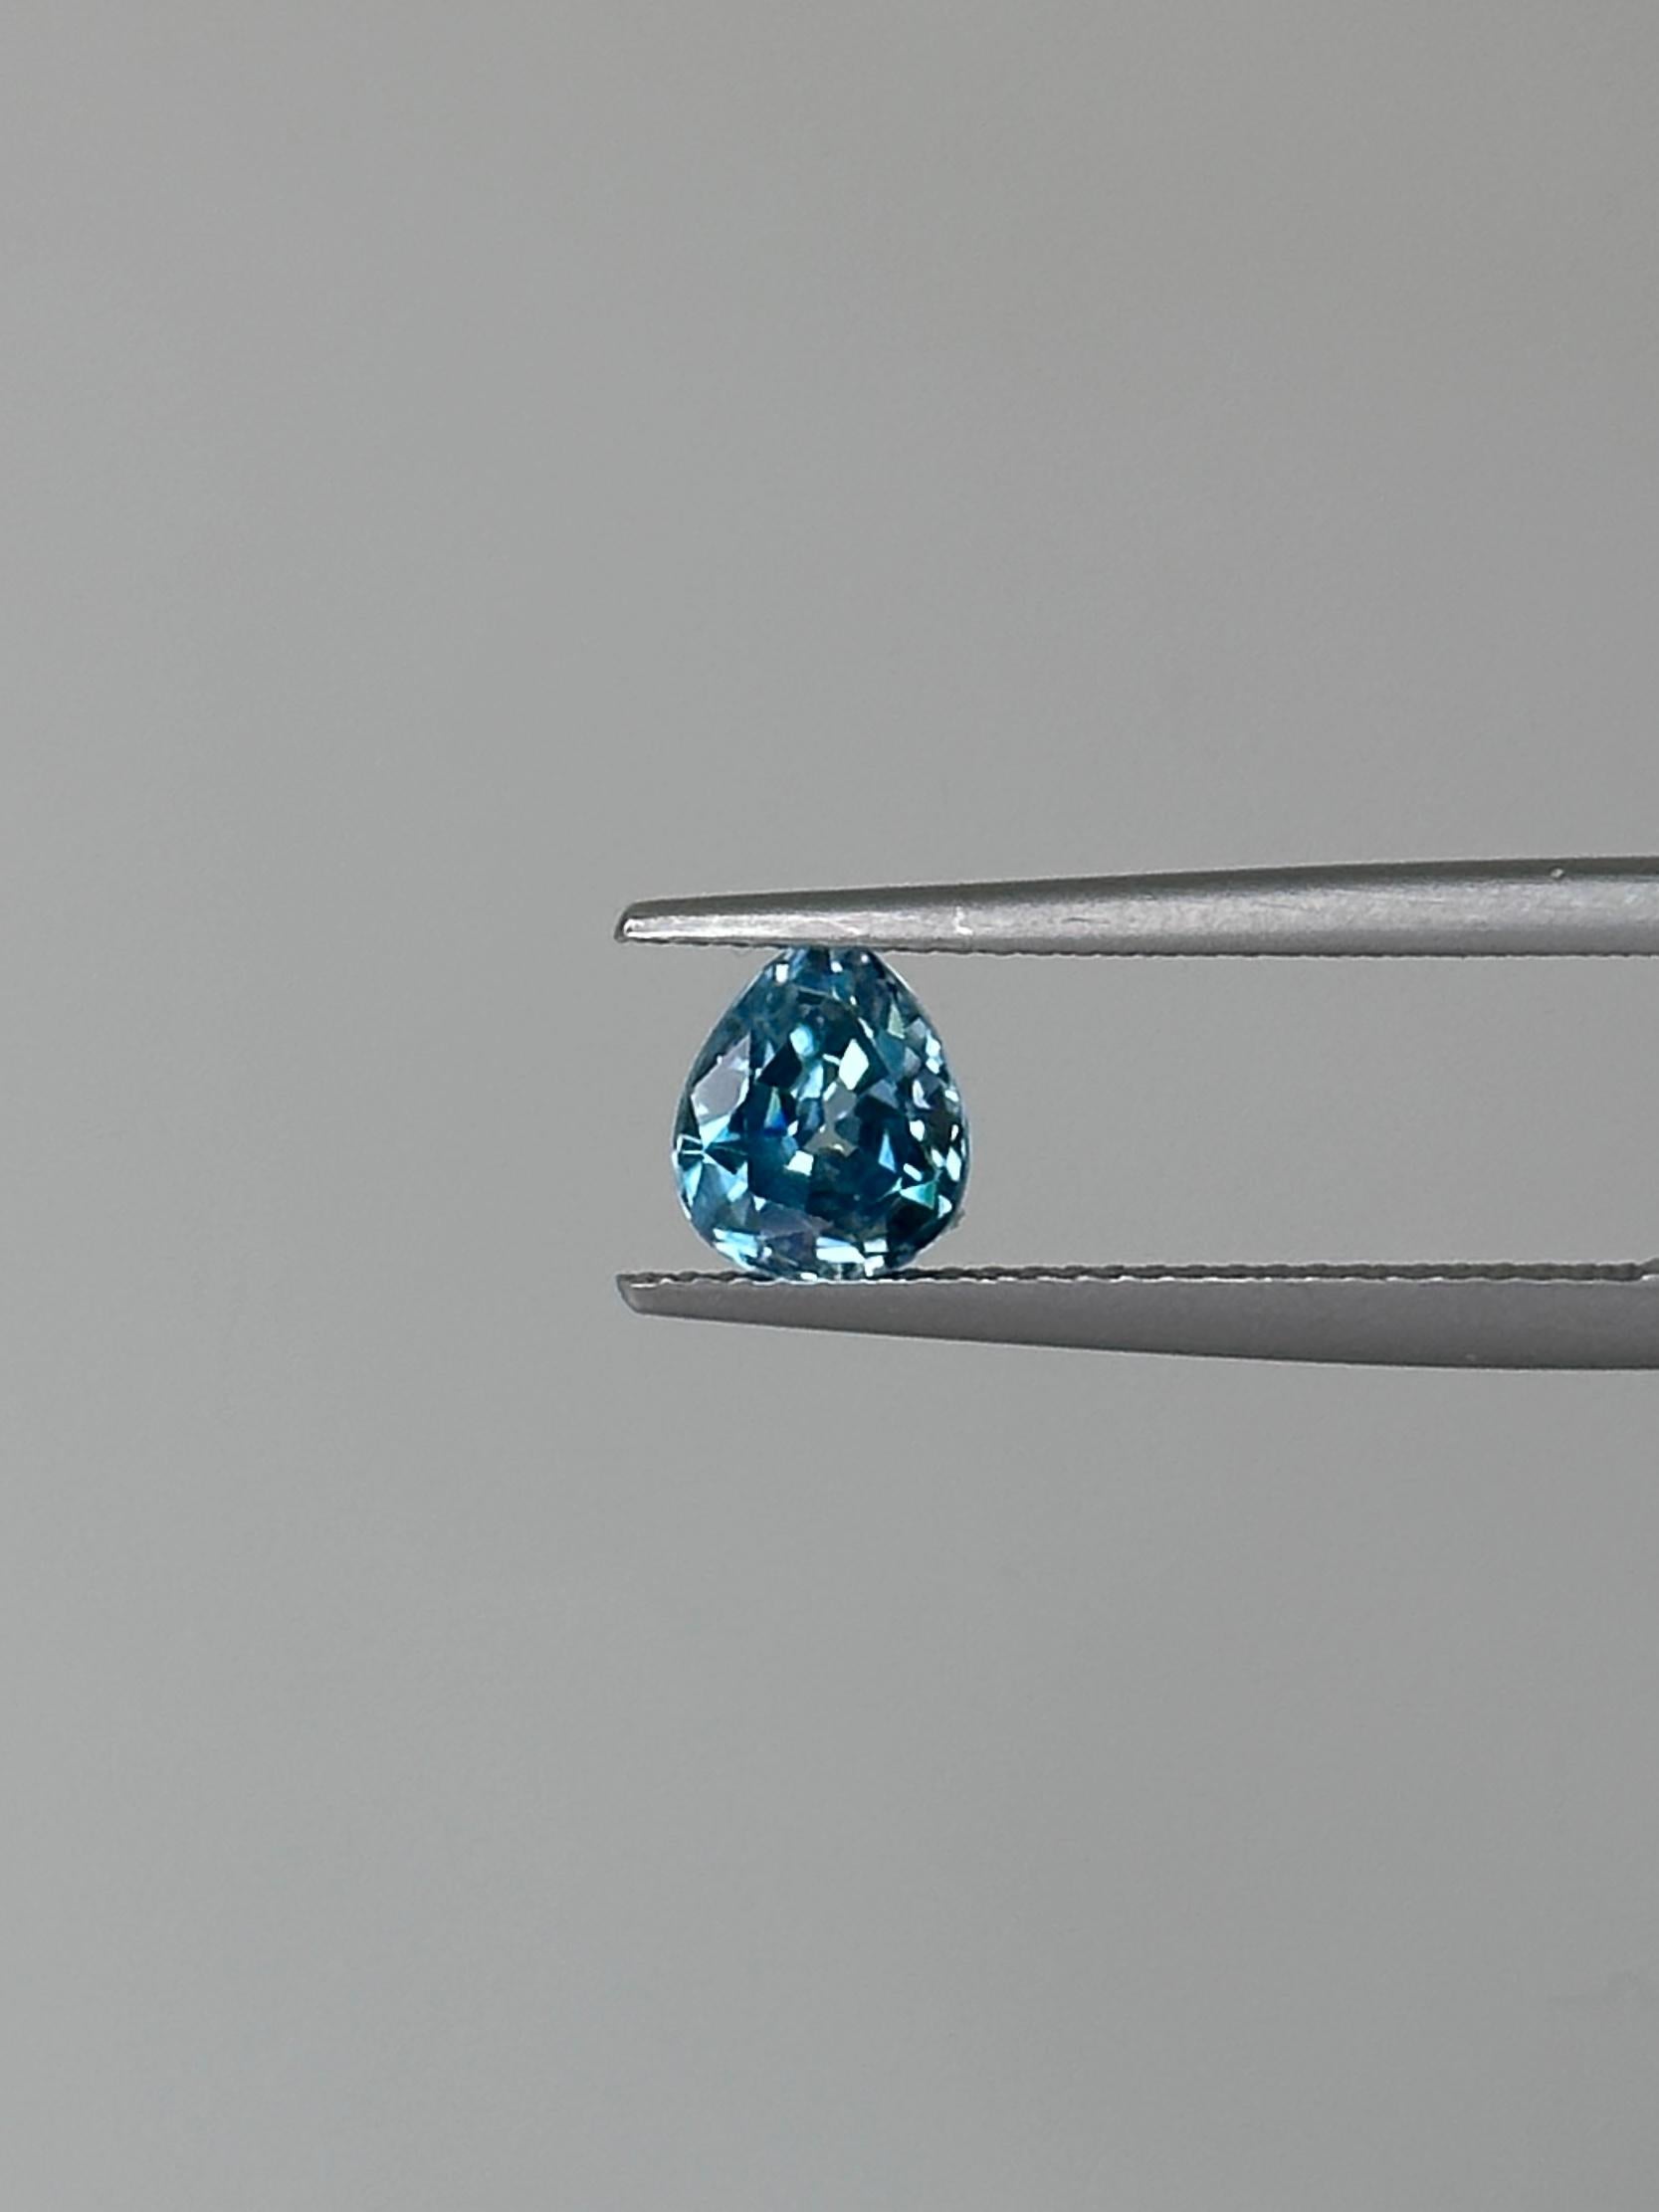 A beautiful sparkling Pear shaped 'Metallic Blue' Zircon from Ratanakiri, Cambodia.

Dimension: 7.03 x 6.01 x 3.96 mm
Traditional Heat Treatment

Rare sparkling Blue Zircon is only found at one place in the world at Ratanakiri province in Northeast